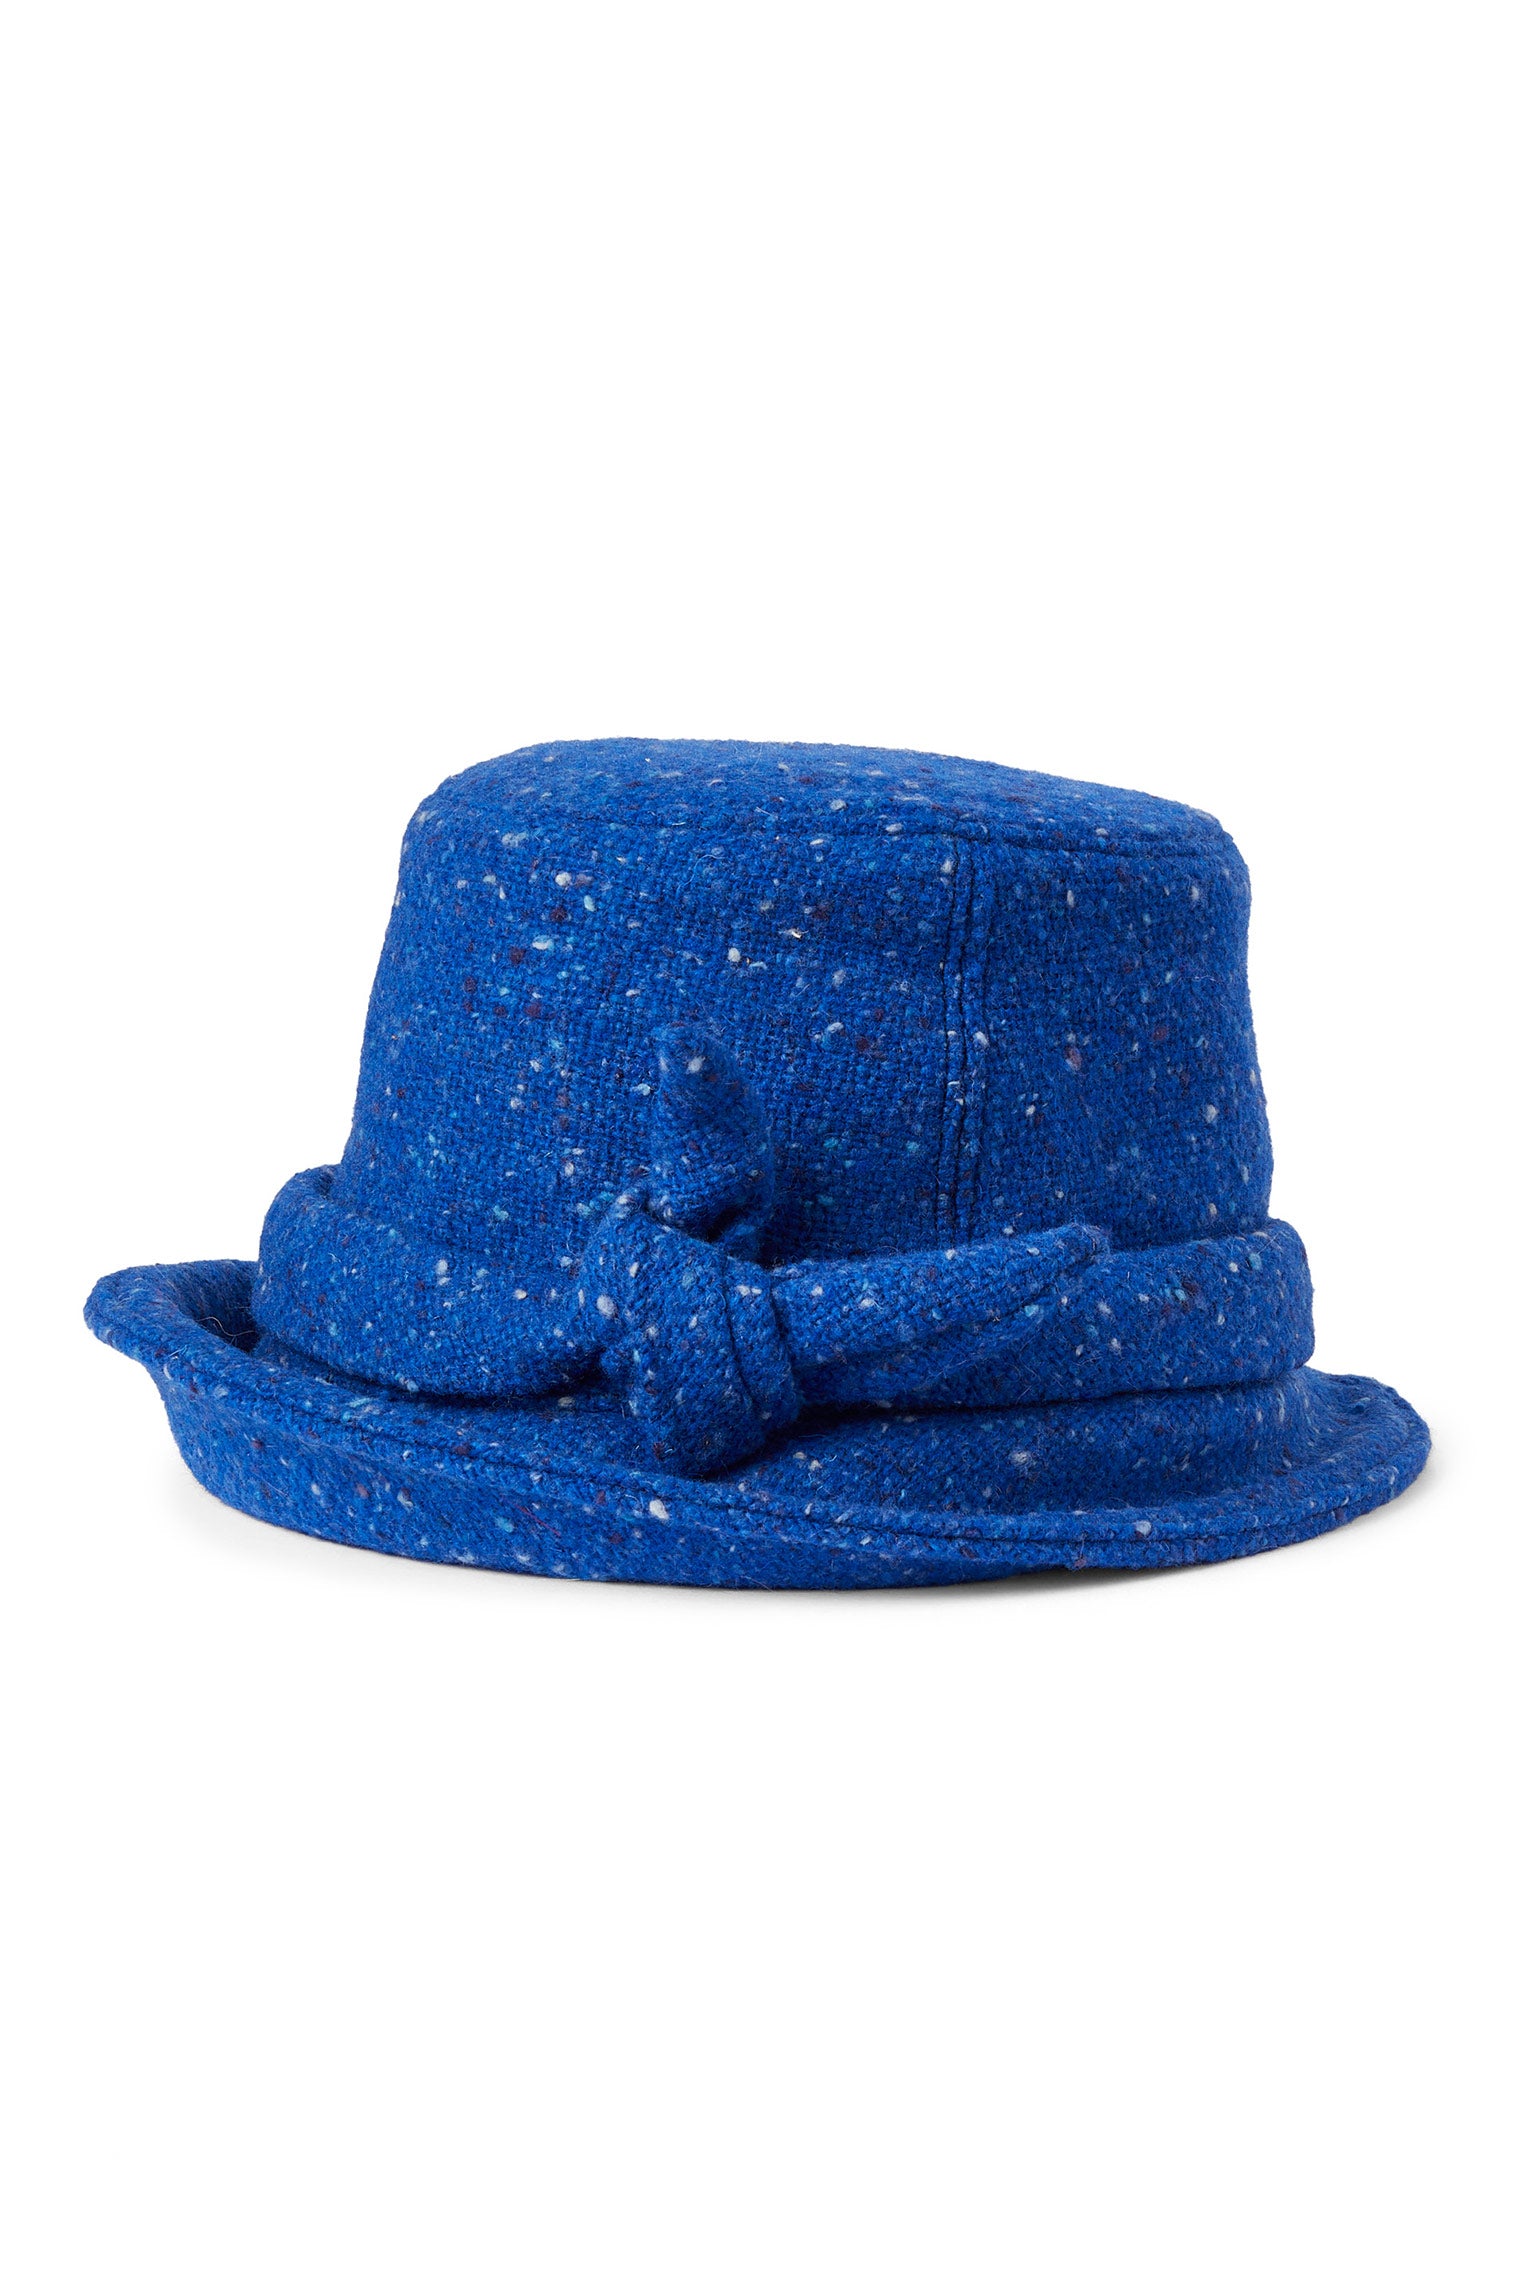 Dolores Blue Cloche - New Season Hat Collection - Lock & Co. Hatters London UK